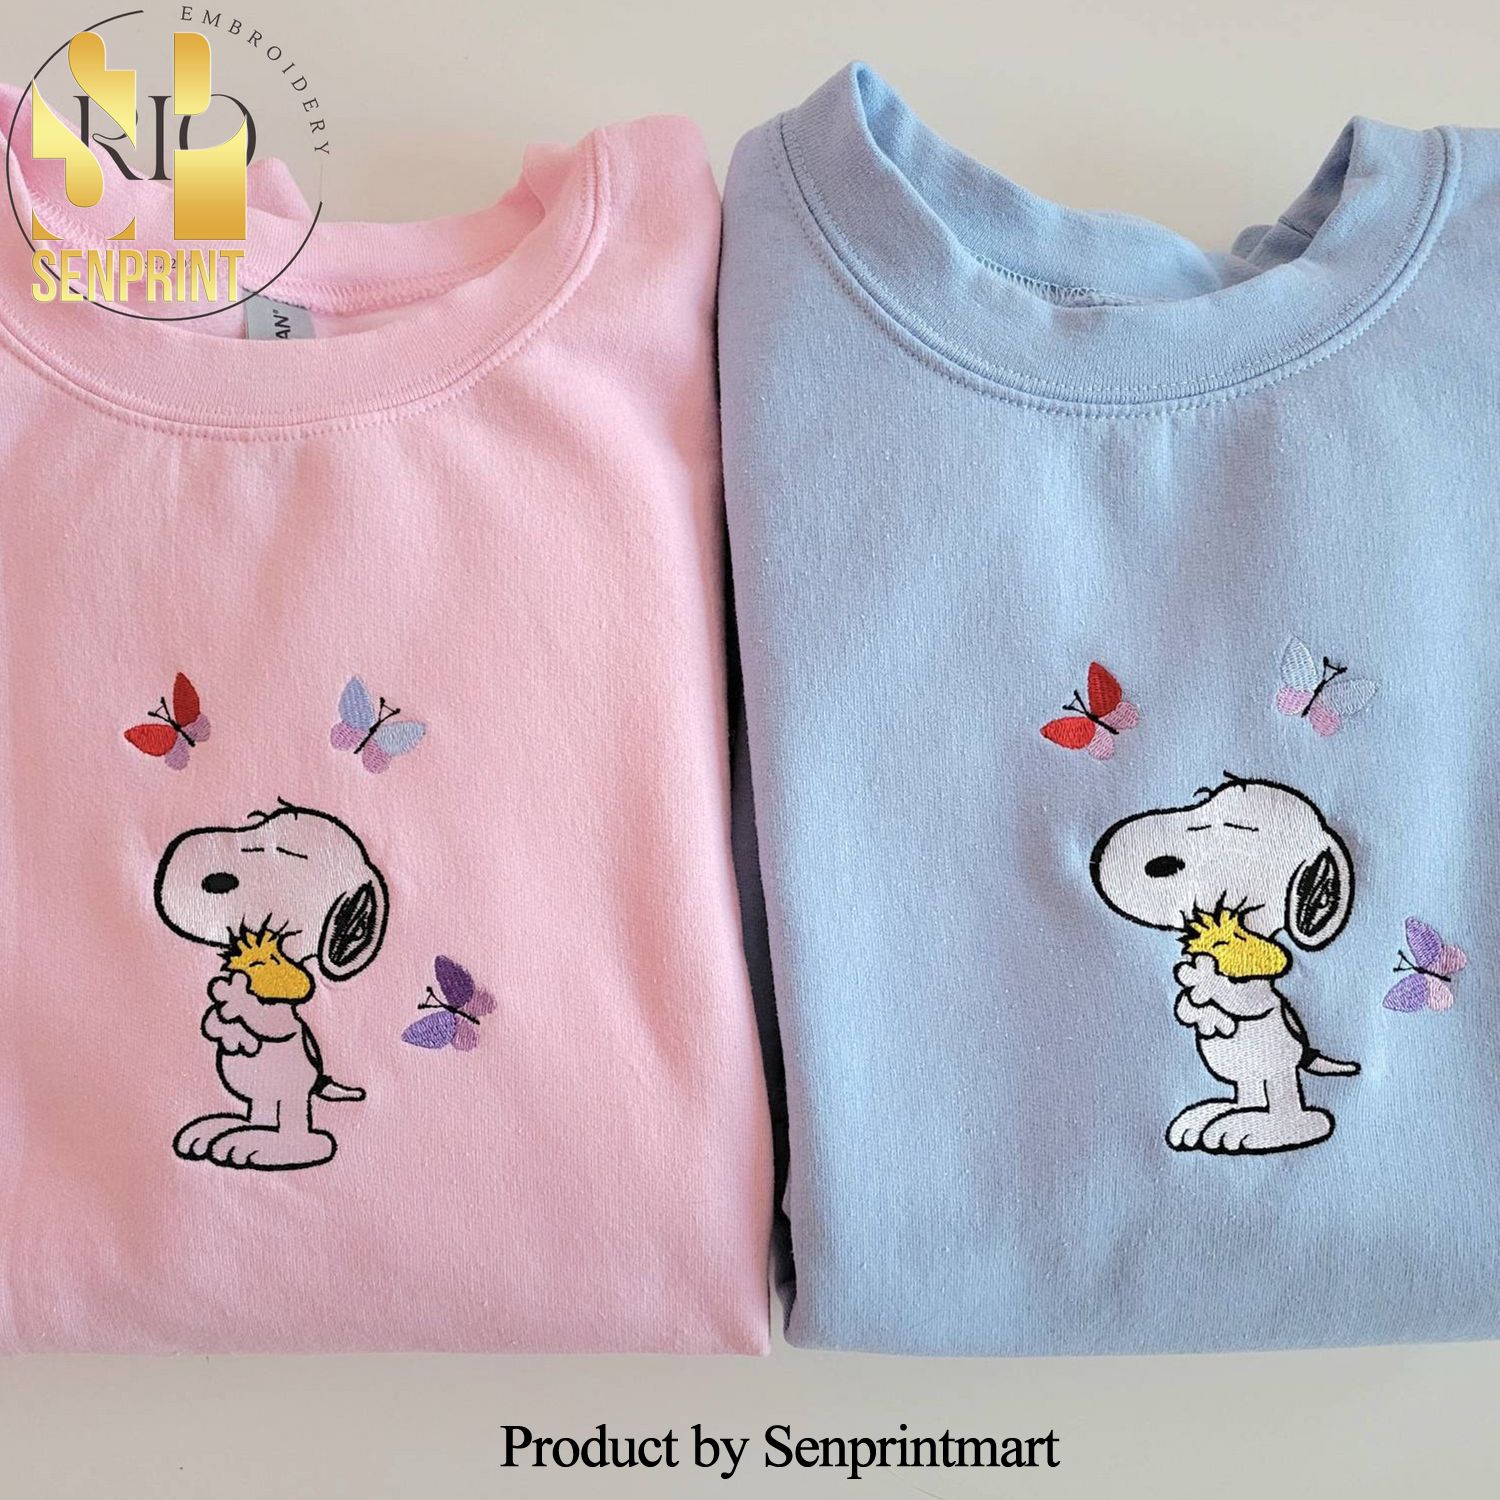 A Warm Embrace Of Snoopy Embroidered Shirt Snoopy sweatshirt embroidered snoopy sweatshirt womens snoopy sweater